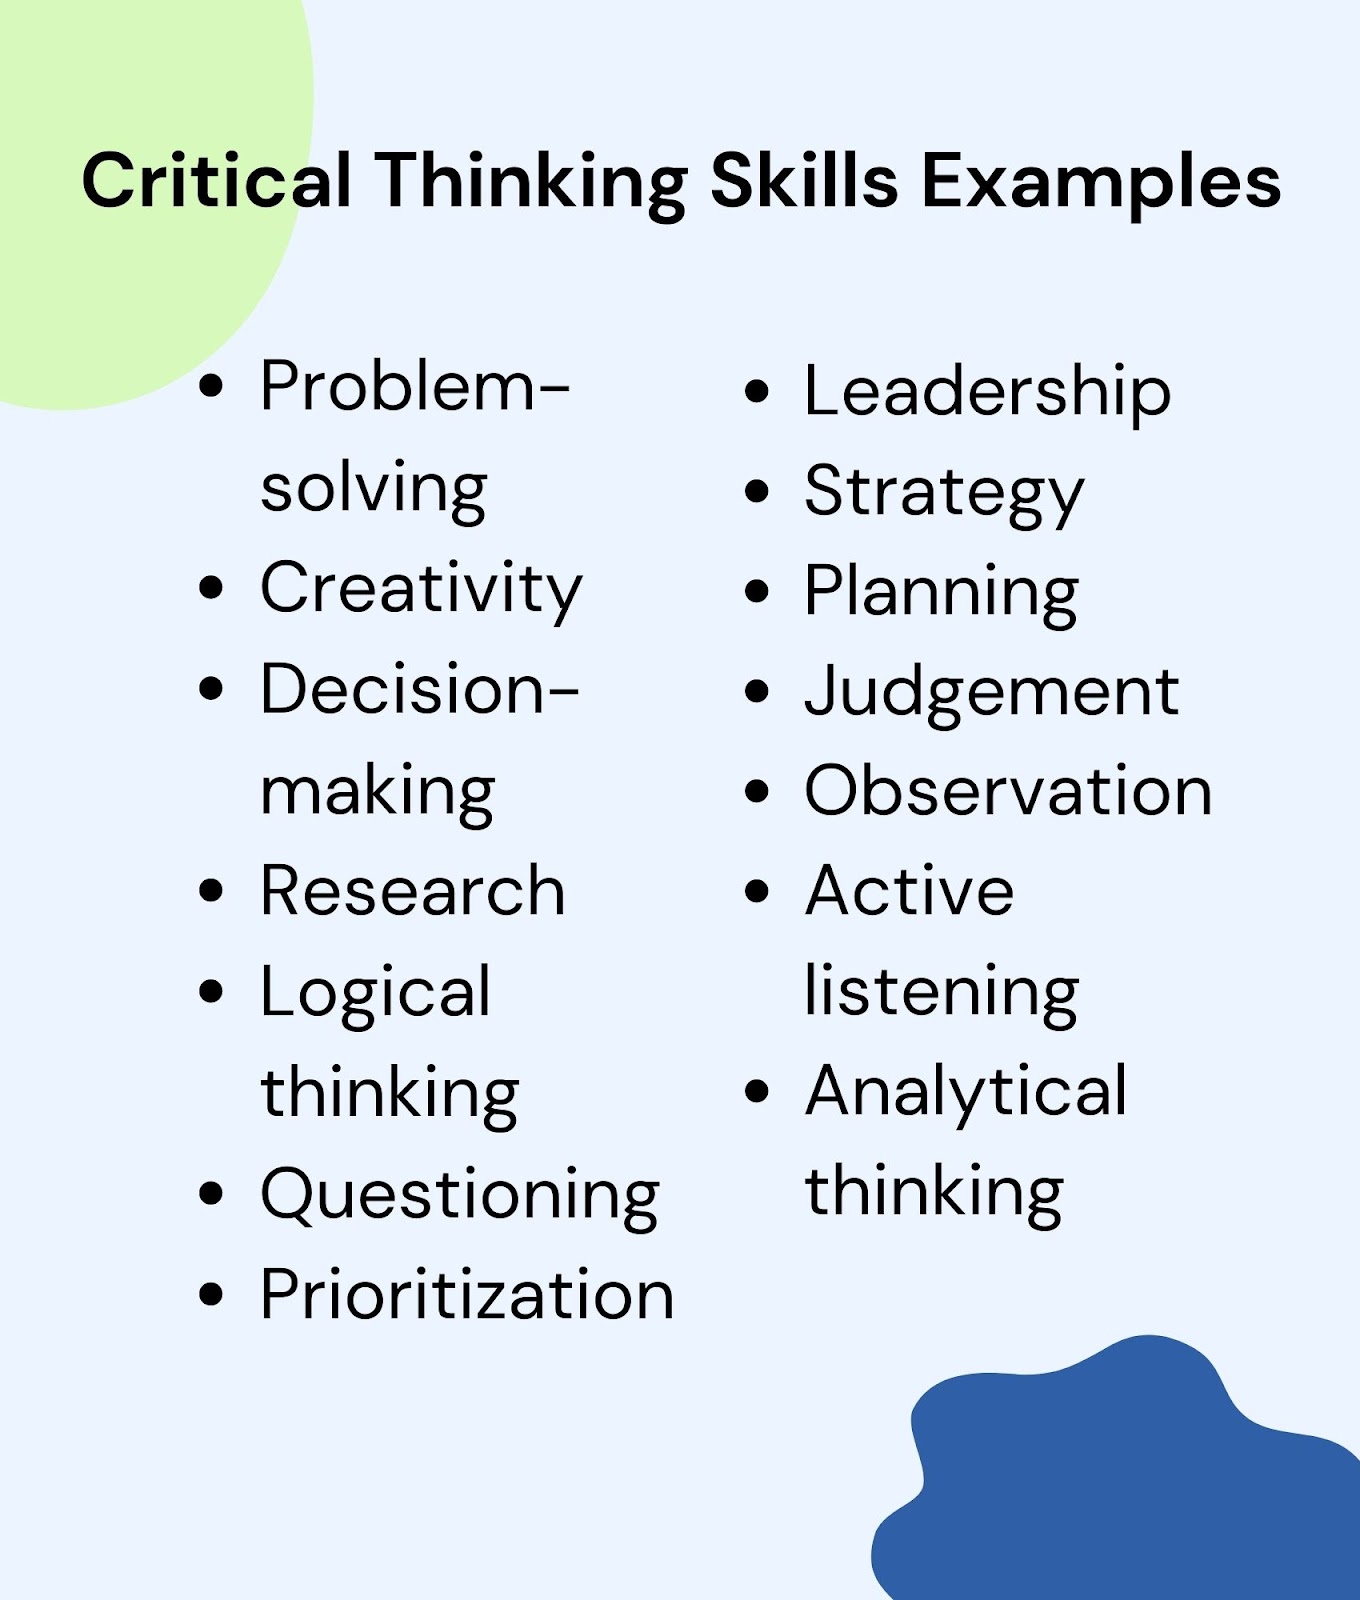 applying critical thinking skills in practical terms includes being